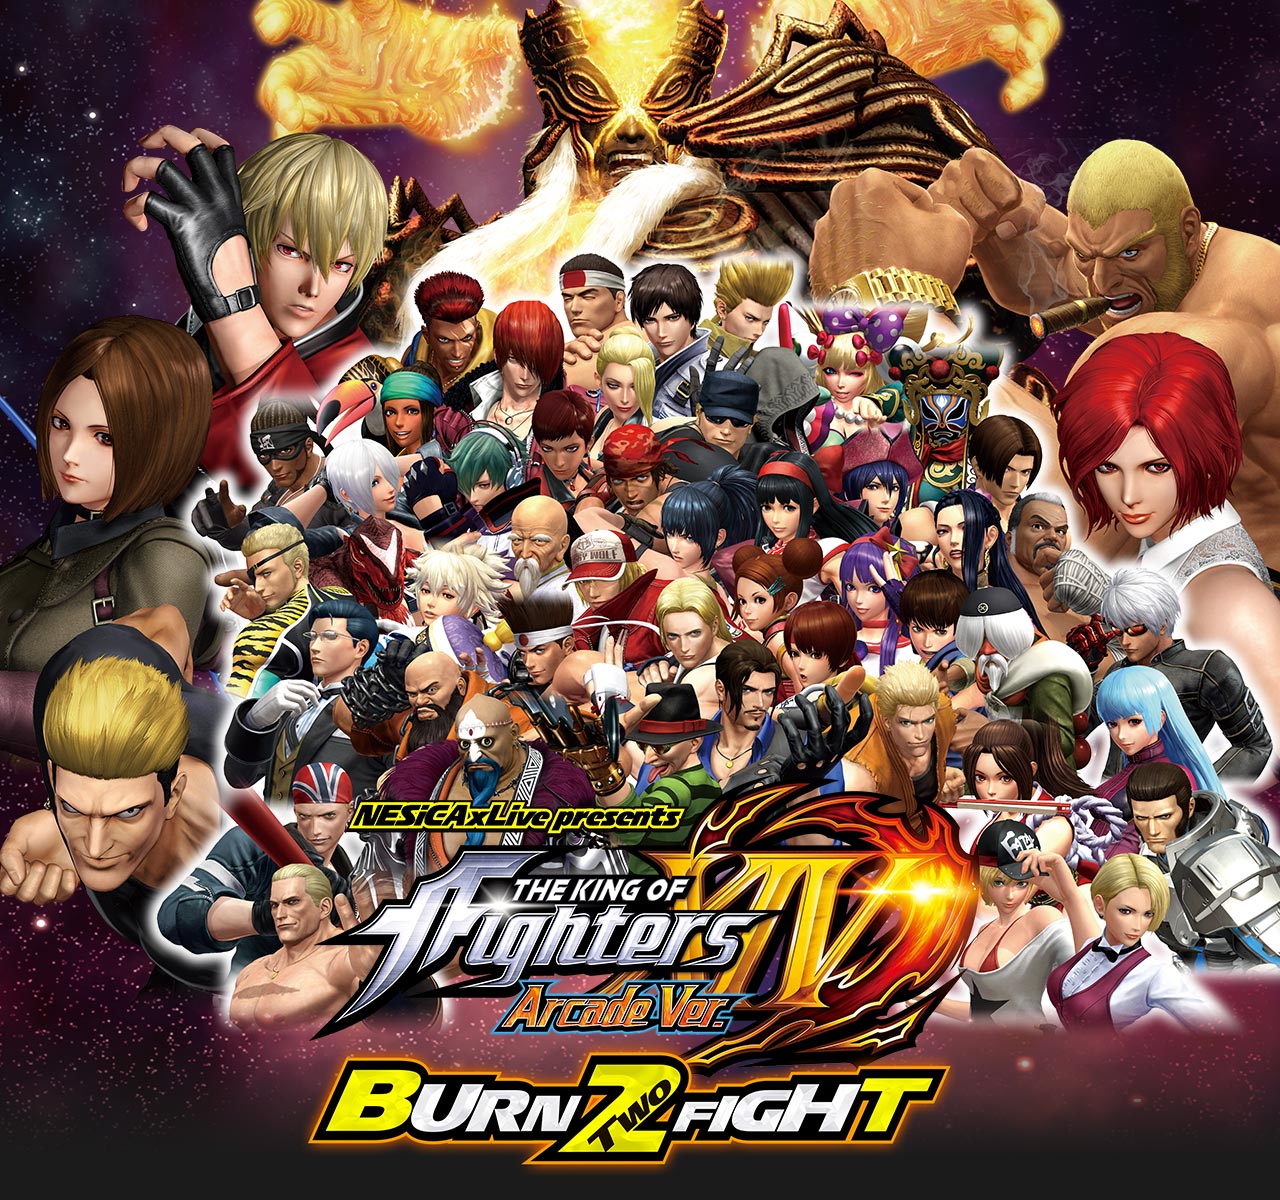 NESiCAxLive presents『THE KING OF FIGHTERS XIV Arcade Ver. BURN 